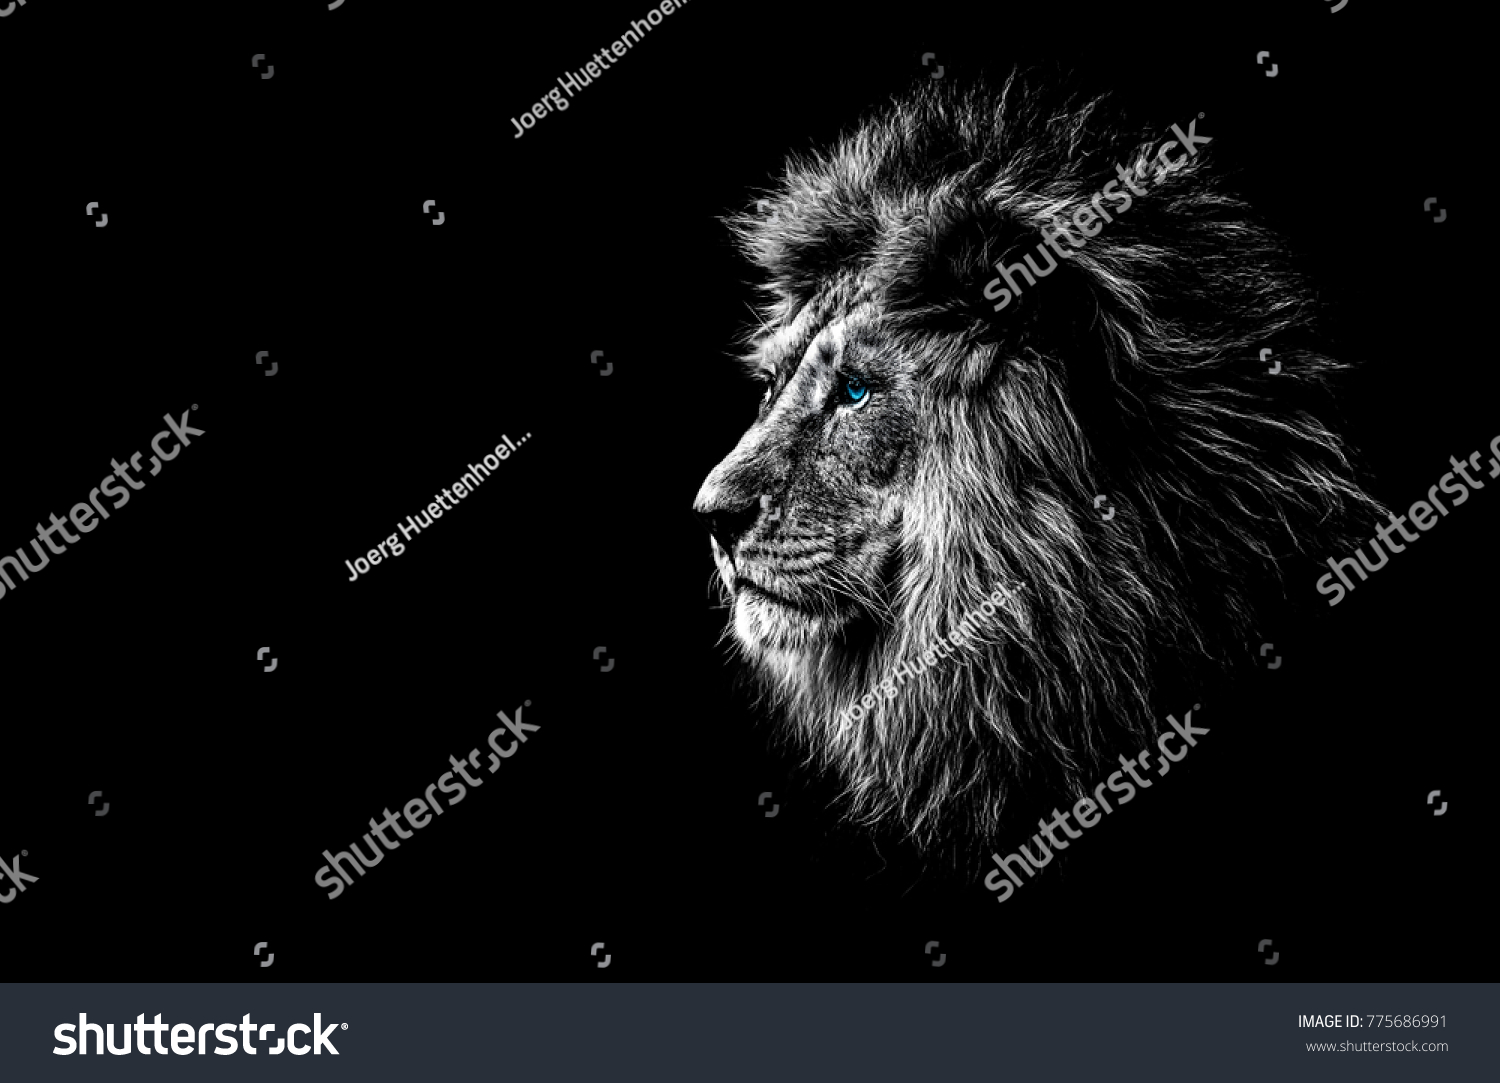 lion in black and white with blue eyes #775686991